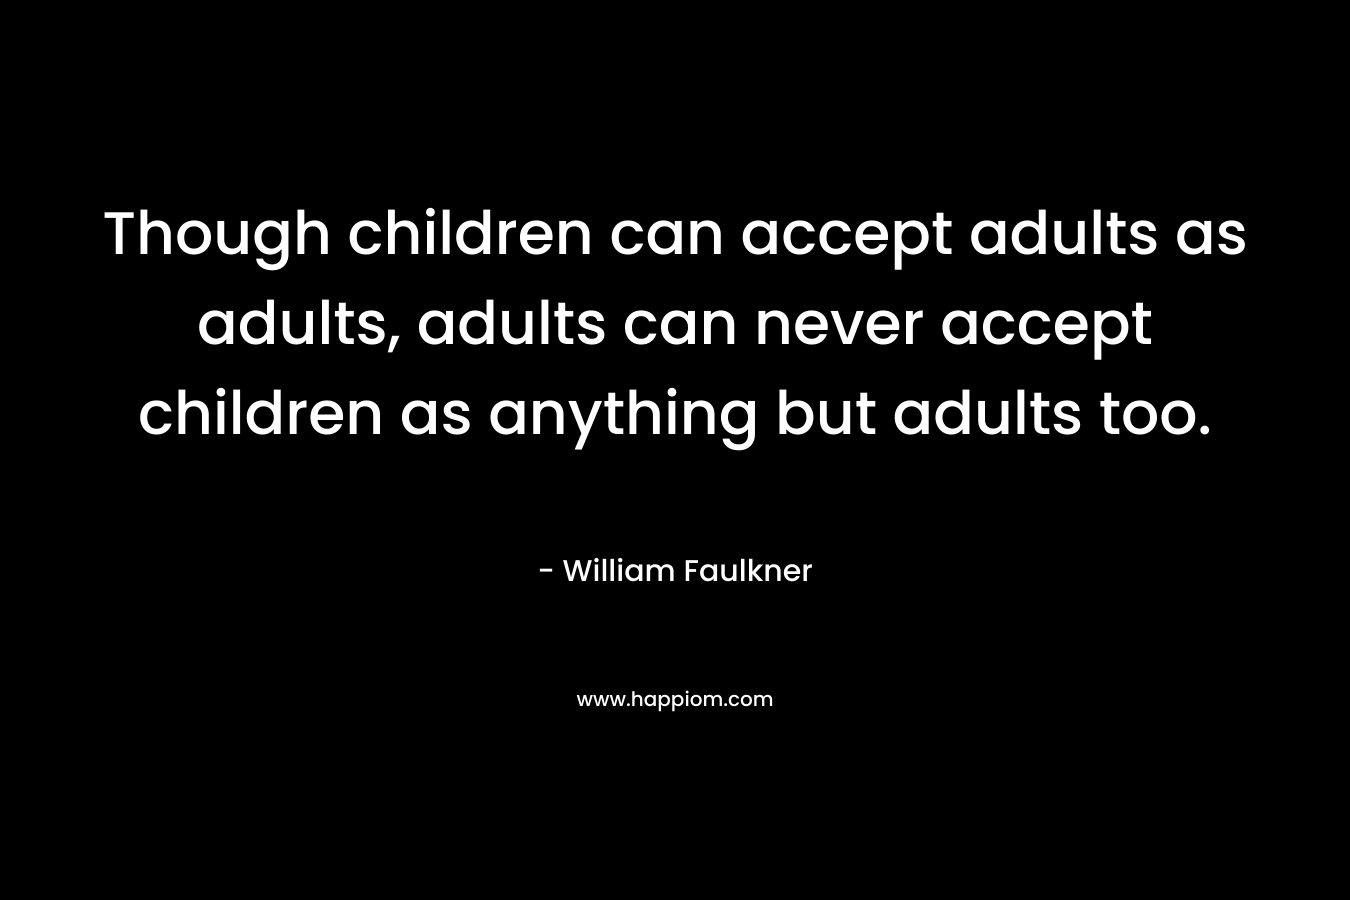 Though children can accept adults as adults, adults can never accept children as anything but adults too.